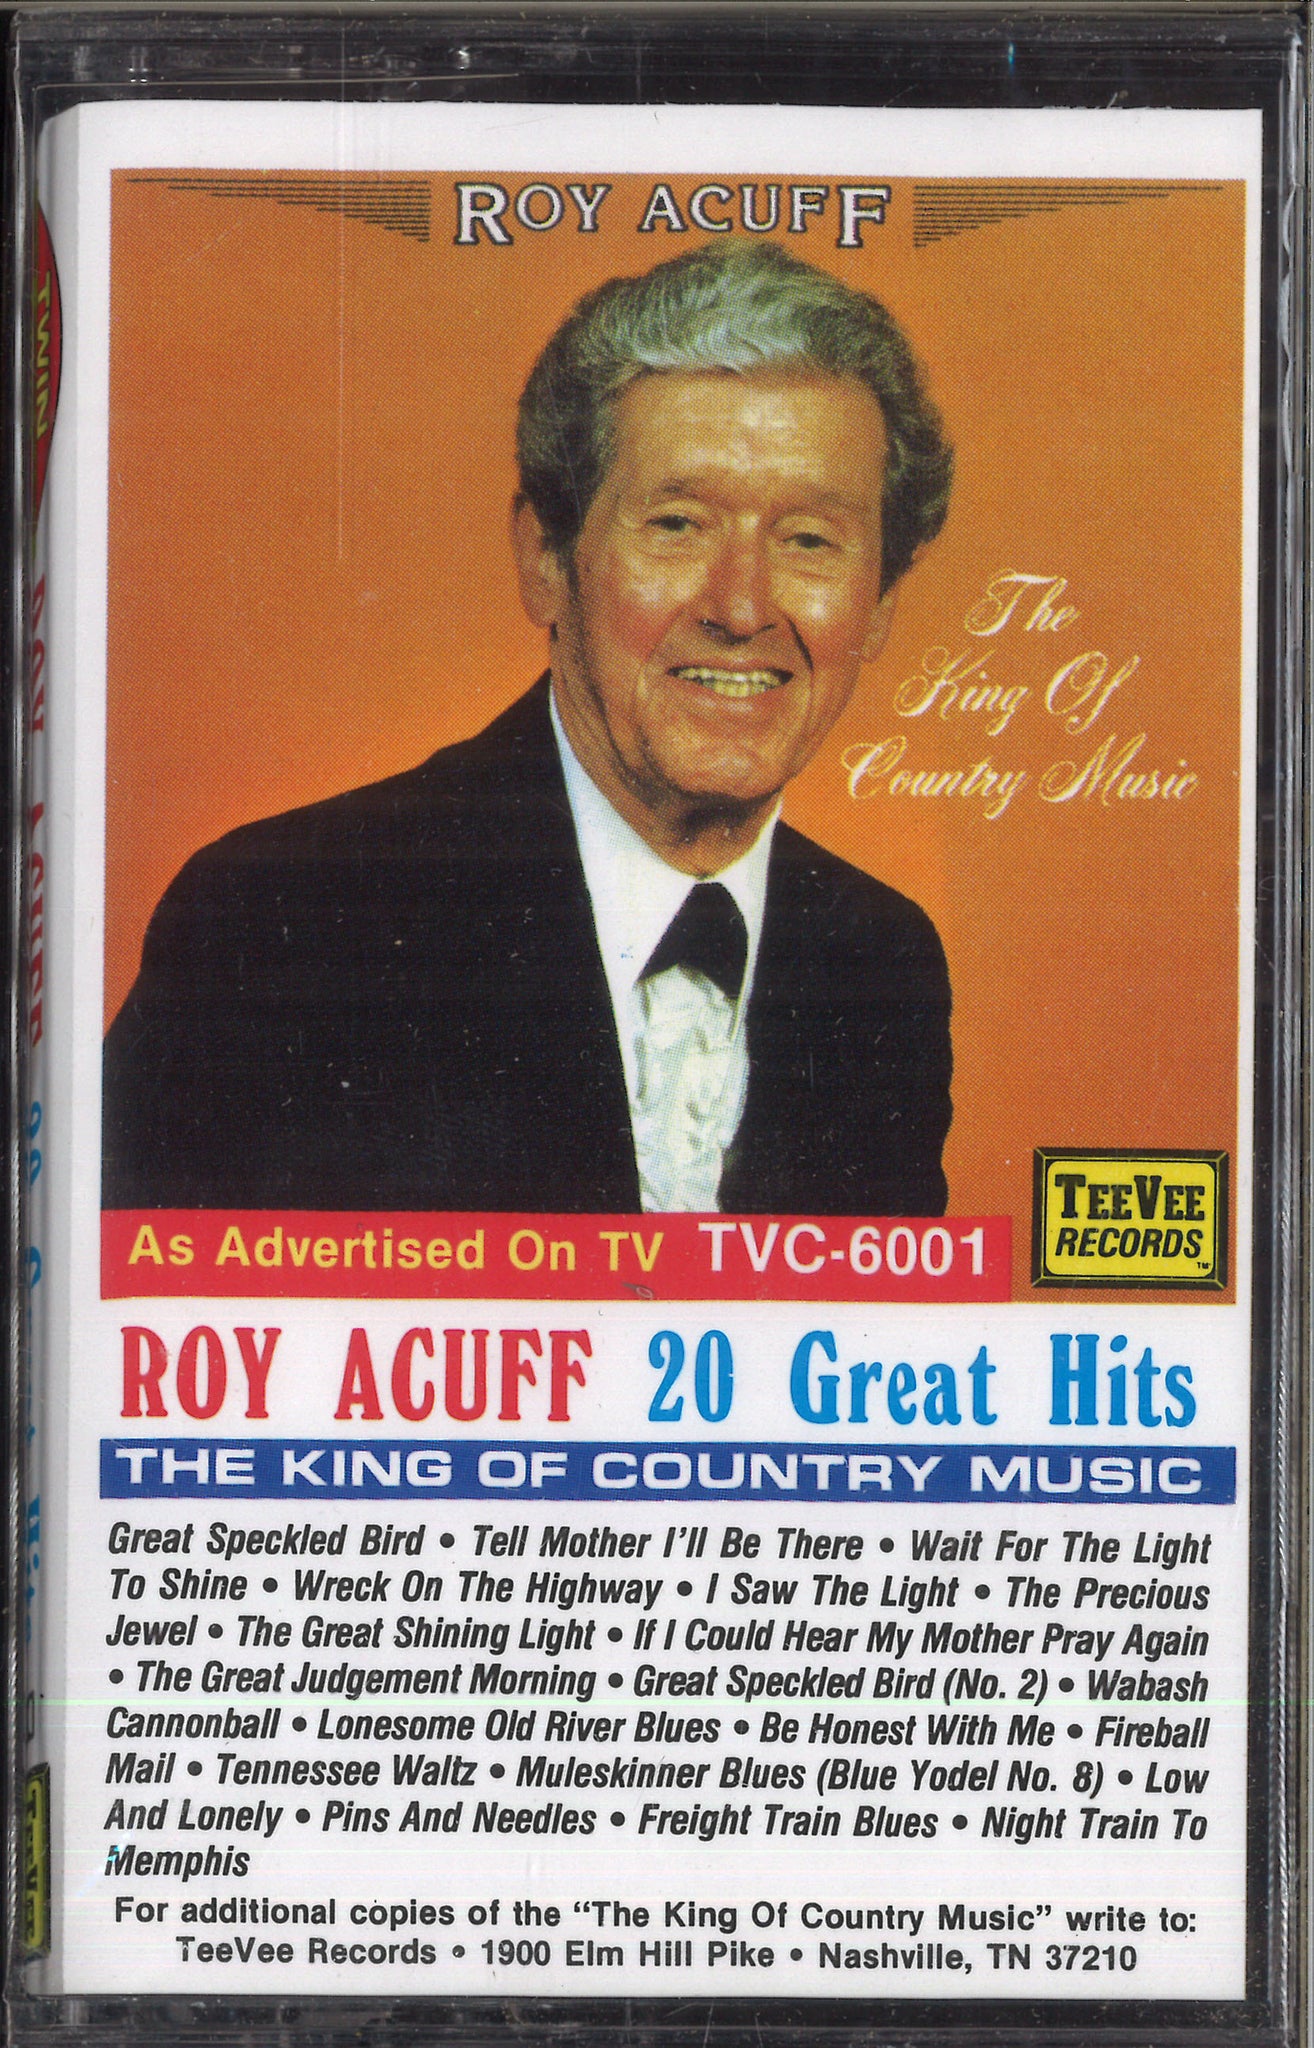 Roy Acuff 20 Great Hits